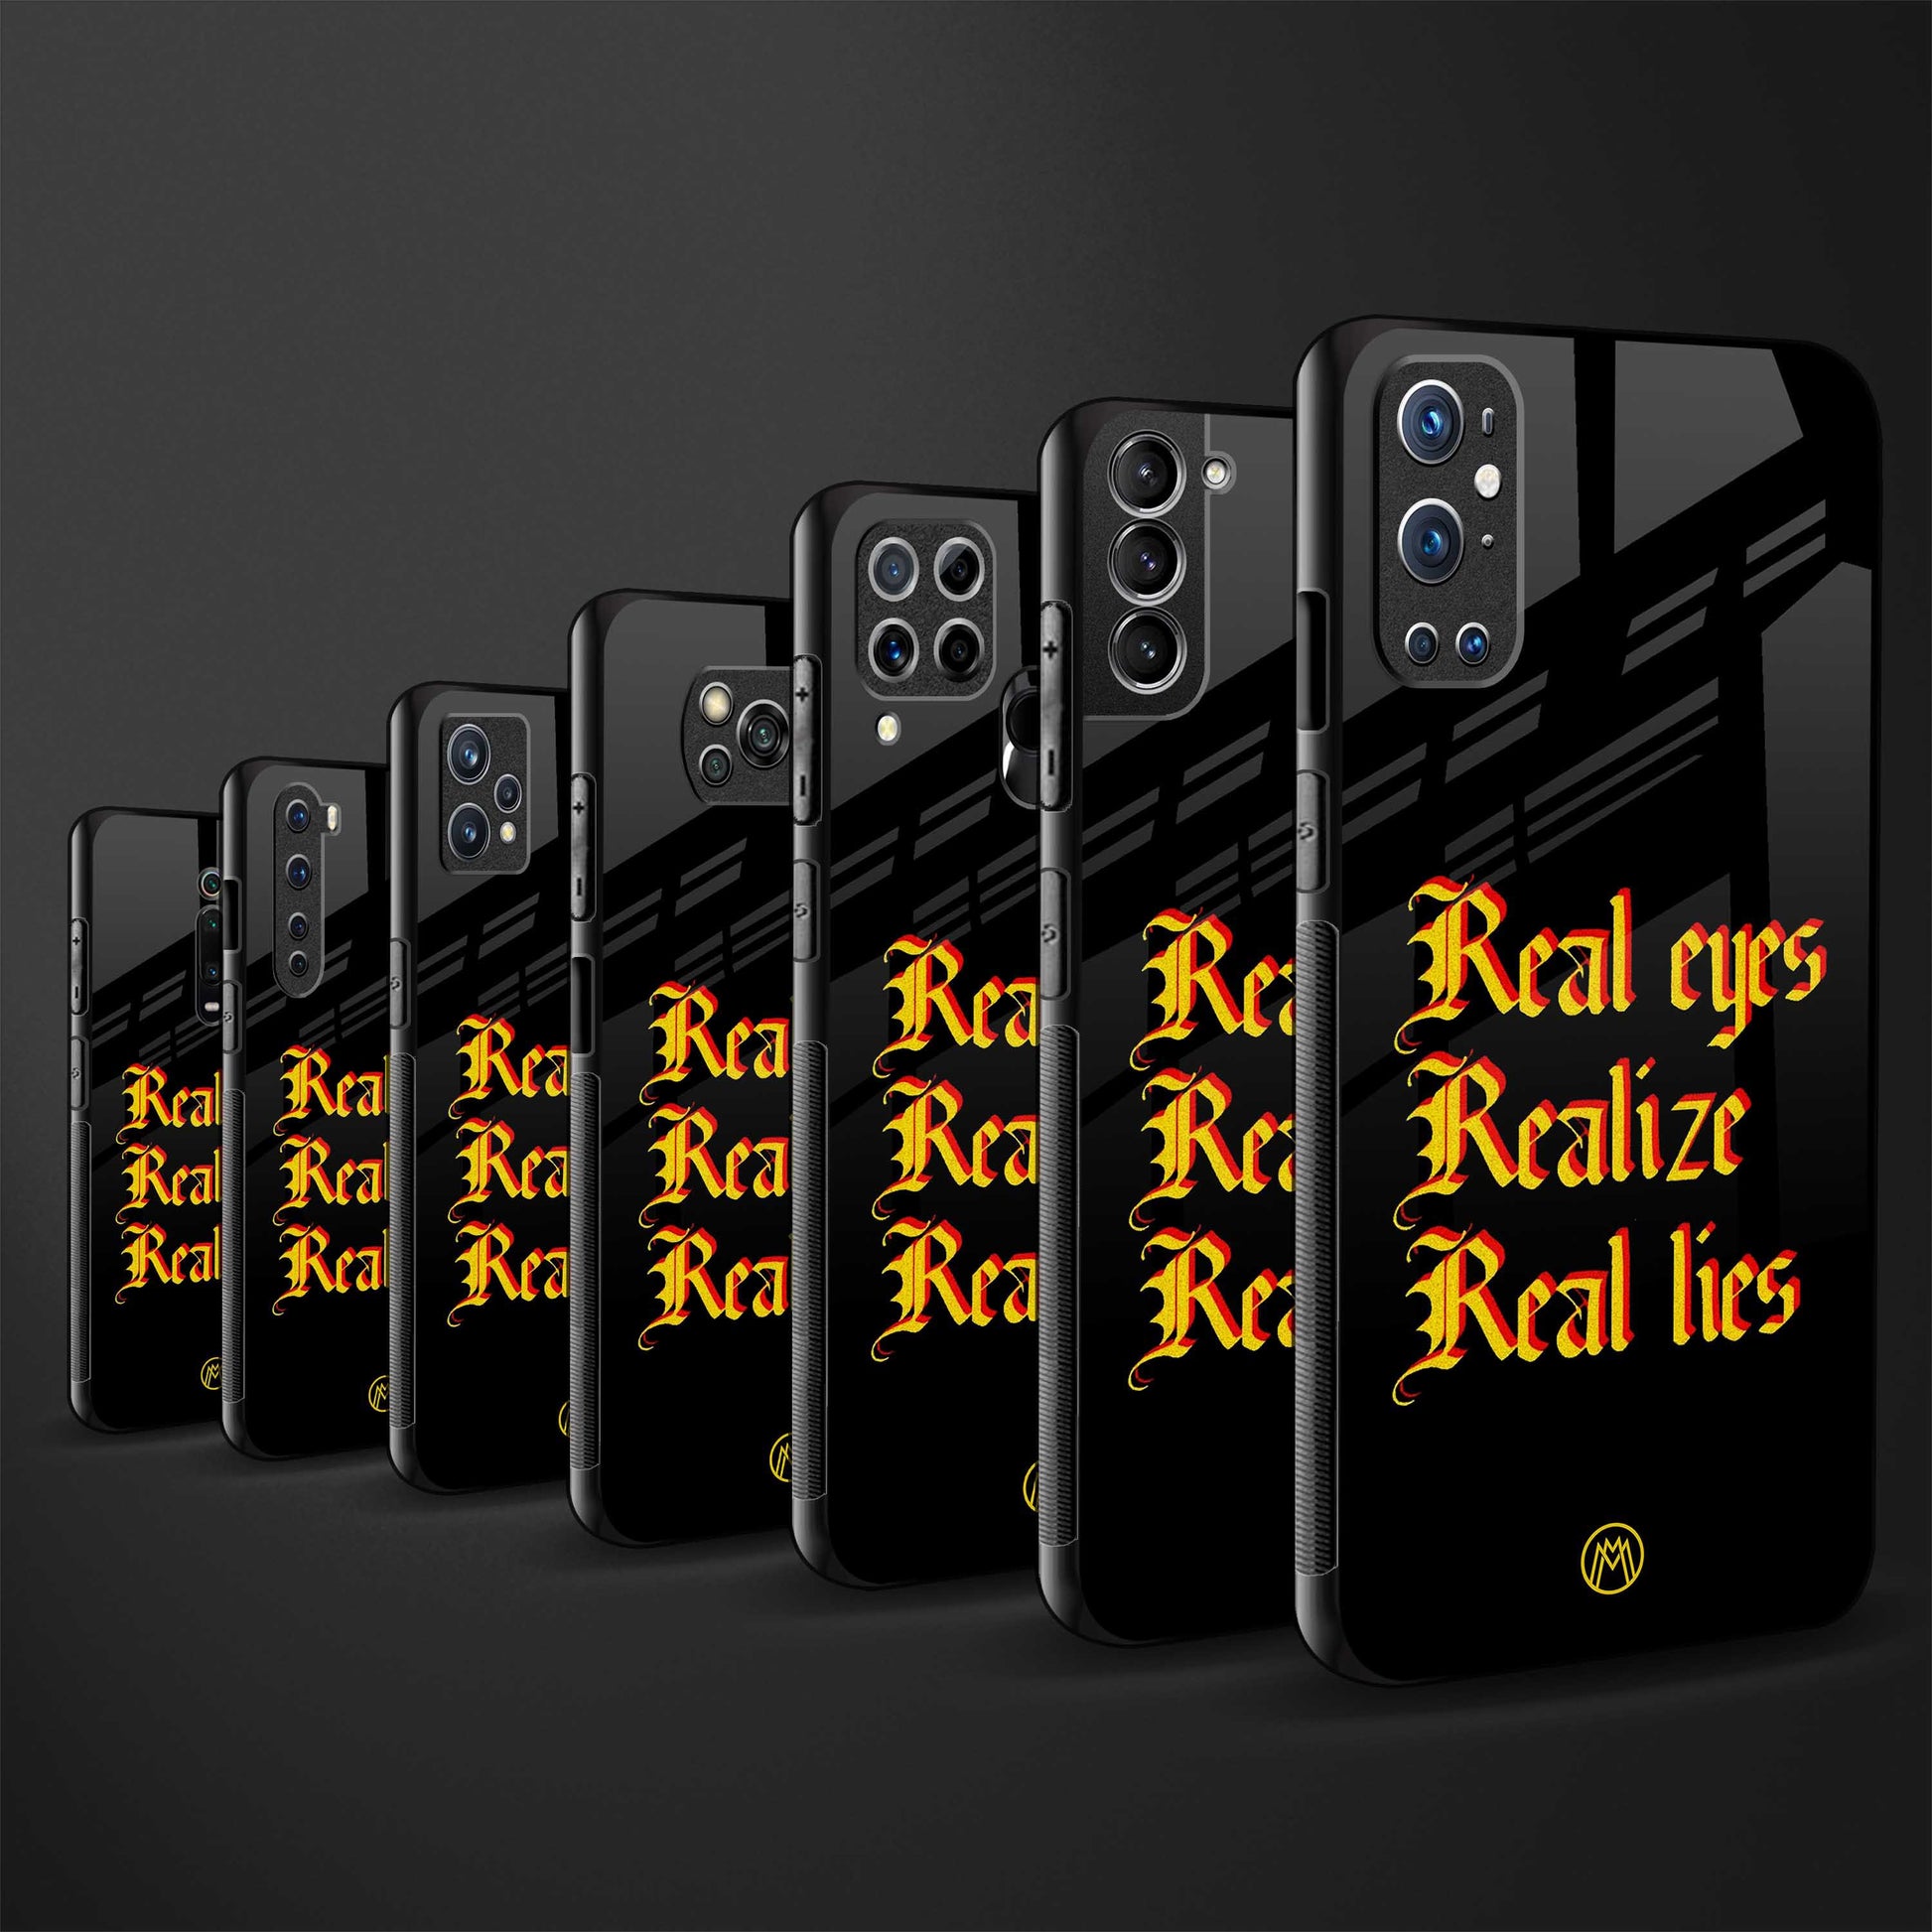 real eyes realize real lies quote glass case for iphone xr image-3